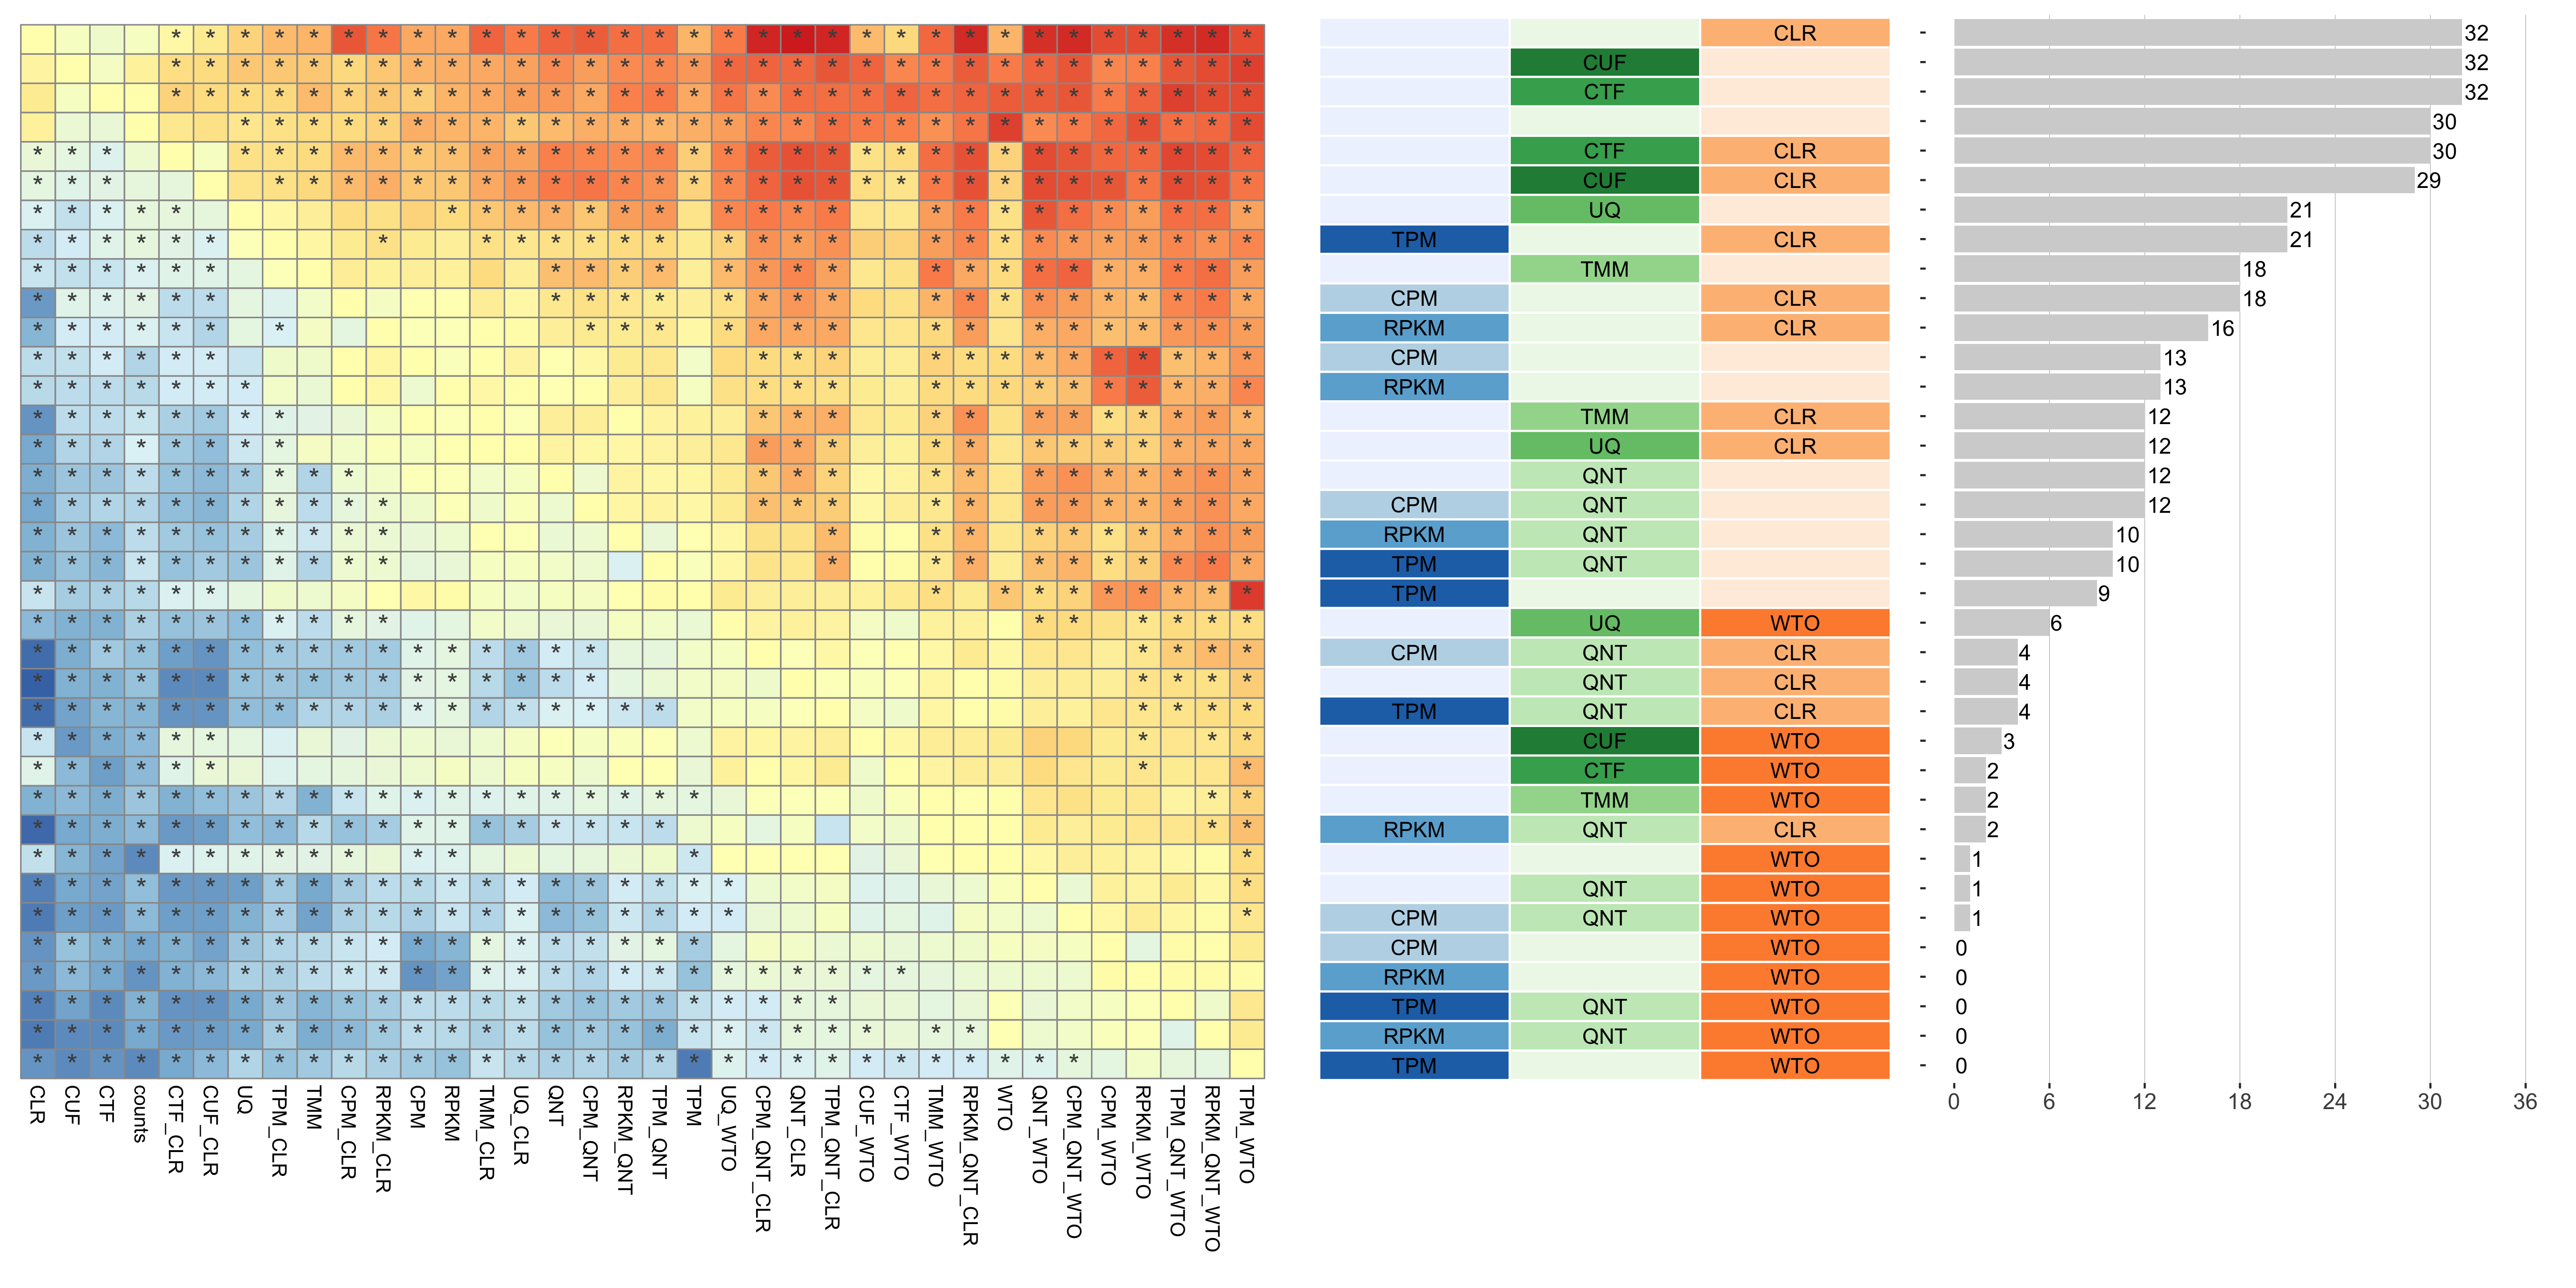 **Dataset-level pairwise comparison of workflow performance.** (**left**) The heatmap shows the relative performance of a pair of workflows, corresponding to a row and a column, directly compared to each other for the SRA datasets based on the tissue-aware gold standard. The color in each cell (row, column) represents the proportion of datasets for which the workflow along the row has a higher log2(p20r/prior) than the workflow along the column. Comparisons that are statistically significant (corrected p < 0.01) based on a paired Wilcoxon test are marked with an asterisk. (**middle**) The workflows (rows) are described in terms of the specific method used in the within-sample normalization (blues), between-sample normalization (greens), and network transformation (oranges) stages. (**right**) The barplot shows the number of times each workflow was significantly greater than another workflow.